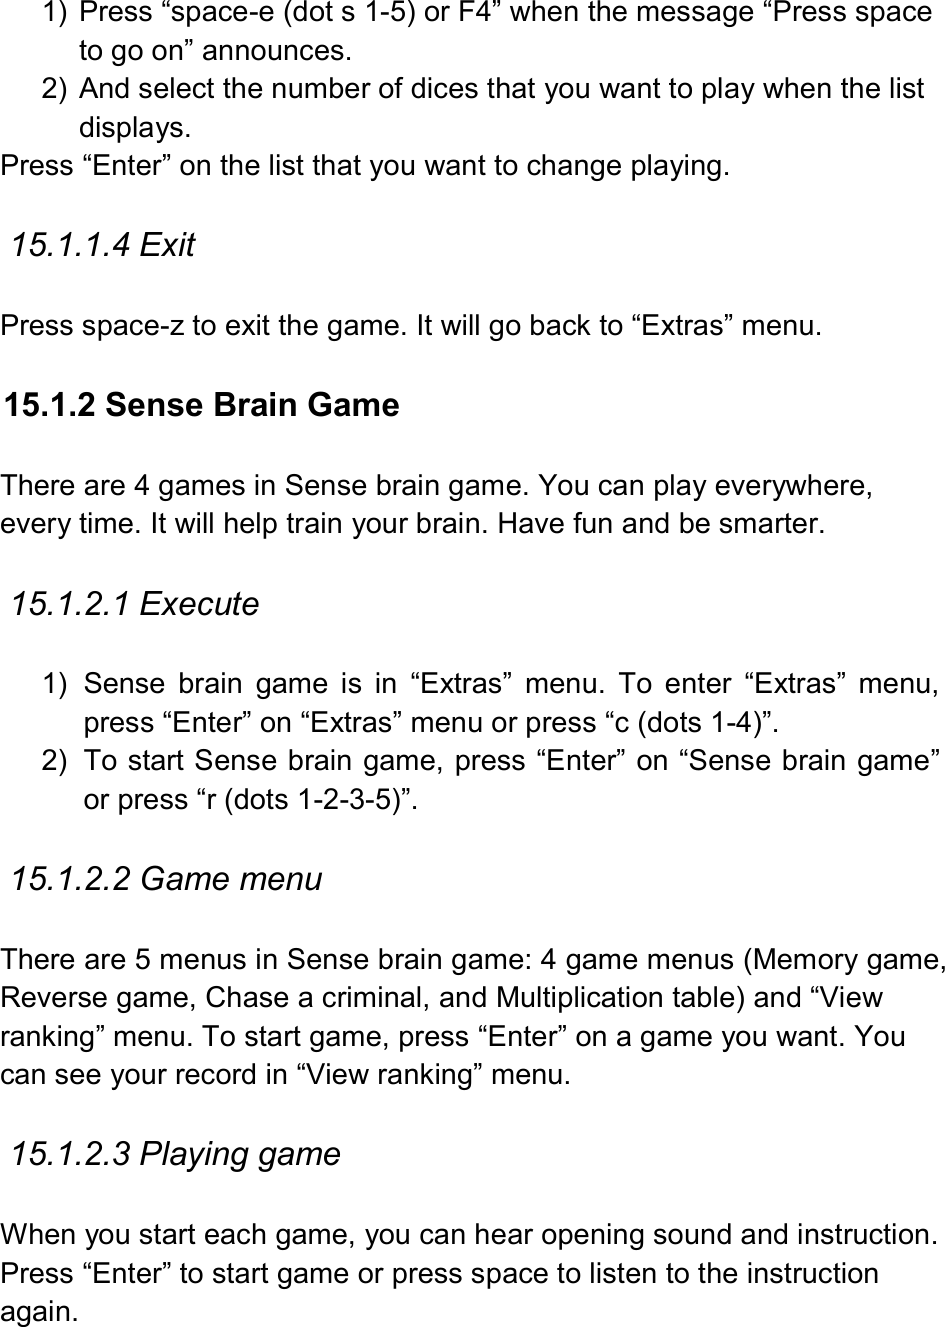  1)  Press “space-e (dot s 1-5) or F4” when the message “Press space to go on” announces. 2)  And select the number of dices that you want to play when the list displays. Press “Enter” on the list that you want to change playing.    15.1.1.4 Exit  Press space-z to exit the game. It will go back to “Extras” menu.  15.1.2 Sense Brain Game  There are 4 games in Sense brain game. You can play everywhere, every time. It will help train your brain. Have fun and be smarter.  15.1.2.1 Execute    1)  Sense  brain  game  is  in  “Extras”  menu.  To  enter  “Extras”  menu, press “Enter” on “Extras” menu or press “c (dots 1-4)”. 2)  To start Sense brain game, press “Enter” on “Sense brain game” or press “r (dots 1-2-3-5)”.  15.1.2.2 Game menu  There are 5 menus in Sense brain game: 4 game menus (Memory game, Reverse game, Chase a criminal, and Multiplication table) and “View ranking” menu. To start game, press “Enter” on a game you want. You can see your record in “View ranking” menu.  15.1.2.3 Playing game  When you start each game, you can hear opening sound and instruction. Press “Enter” to start game or press space to listen to the instruction again.  